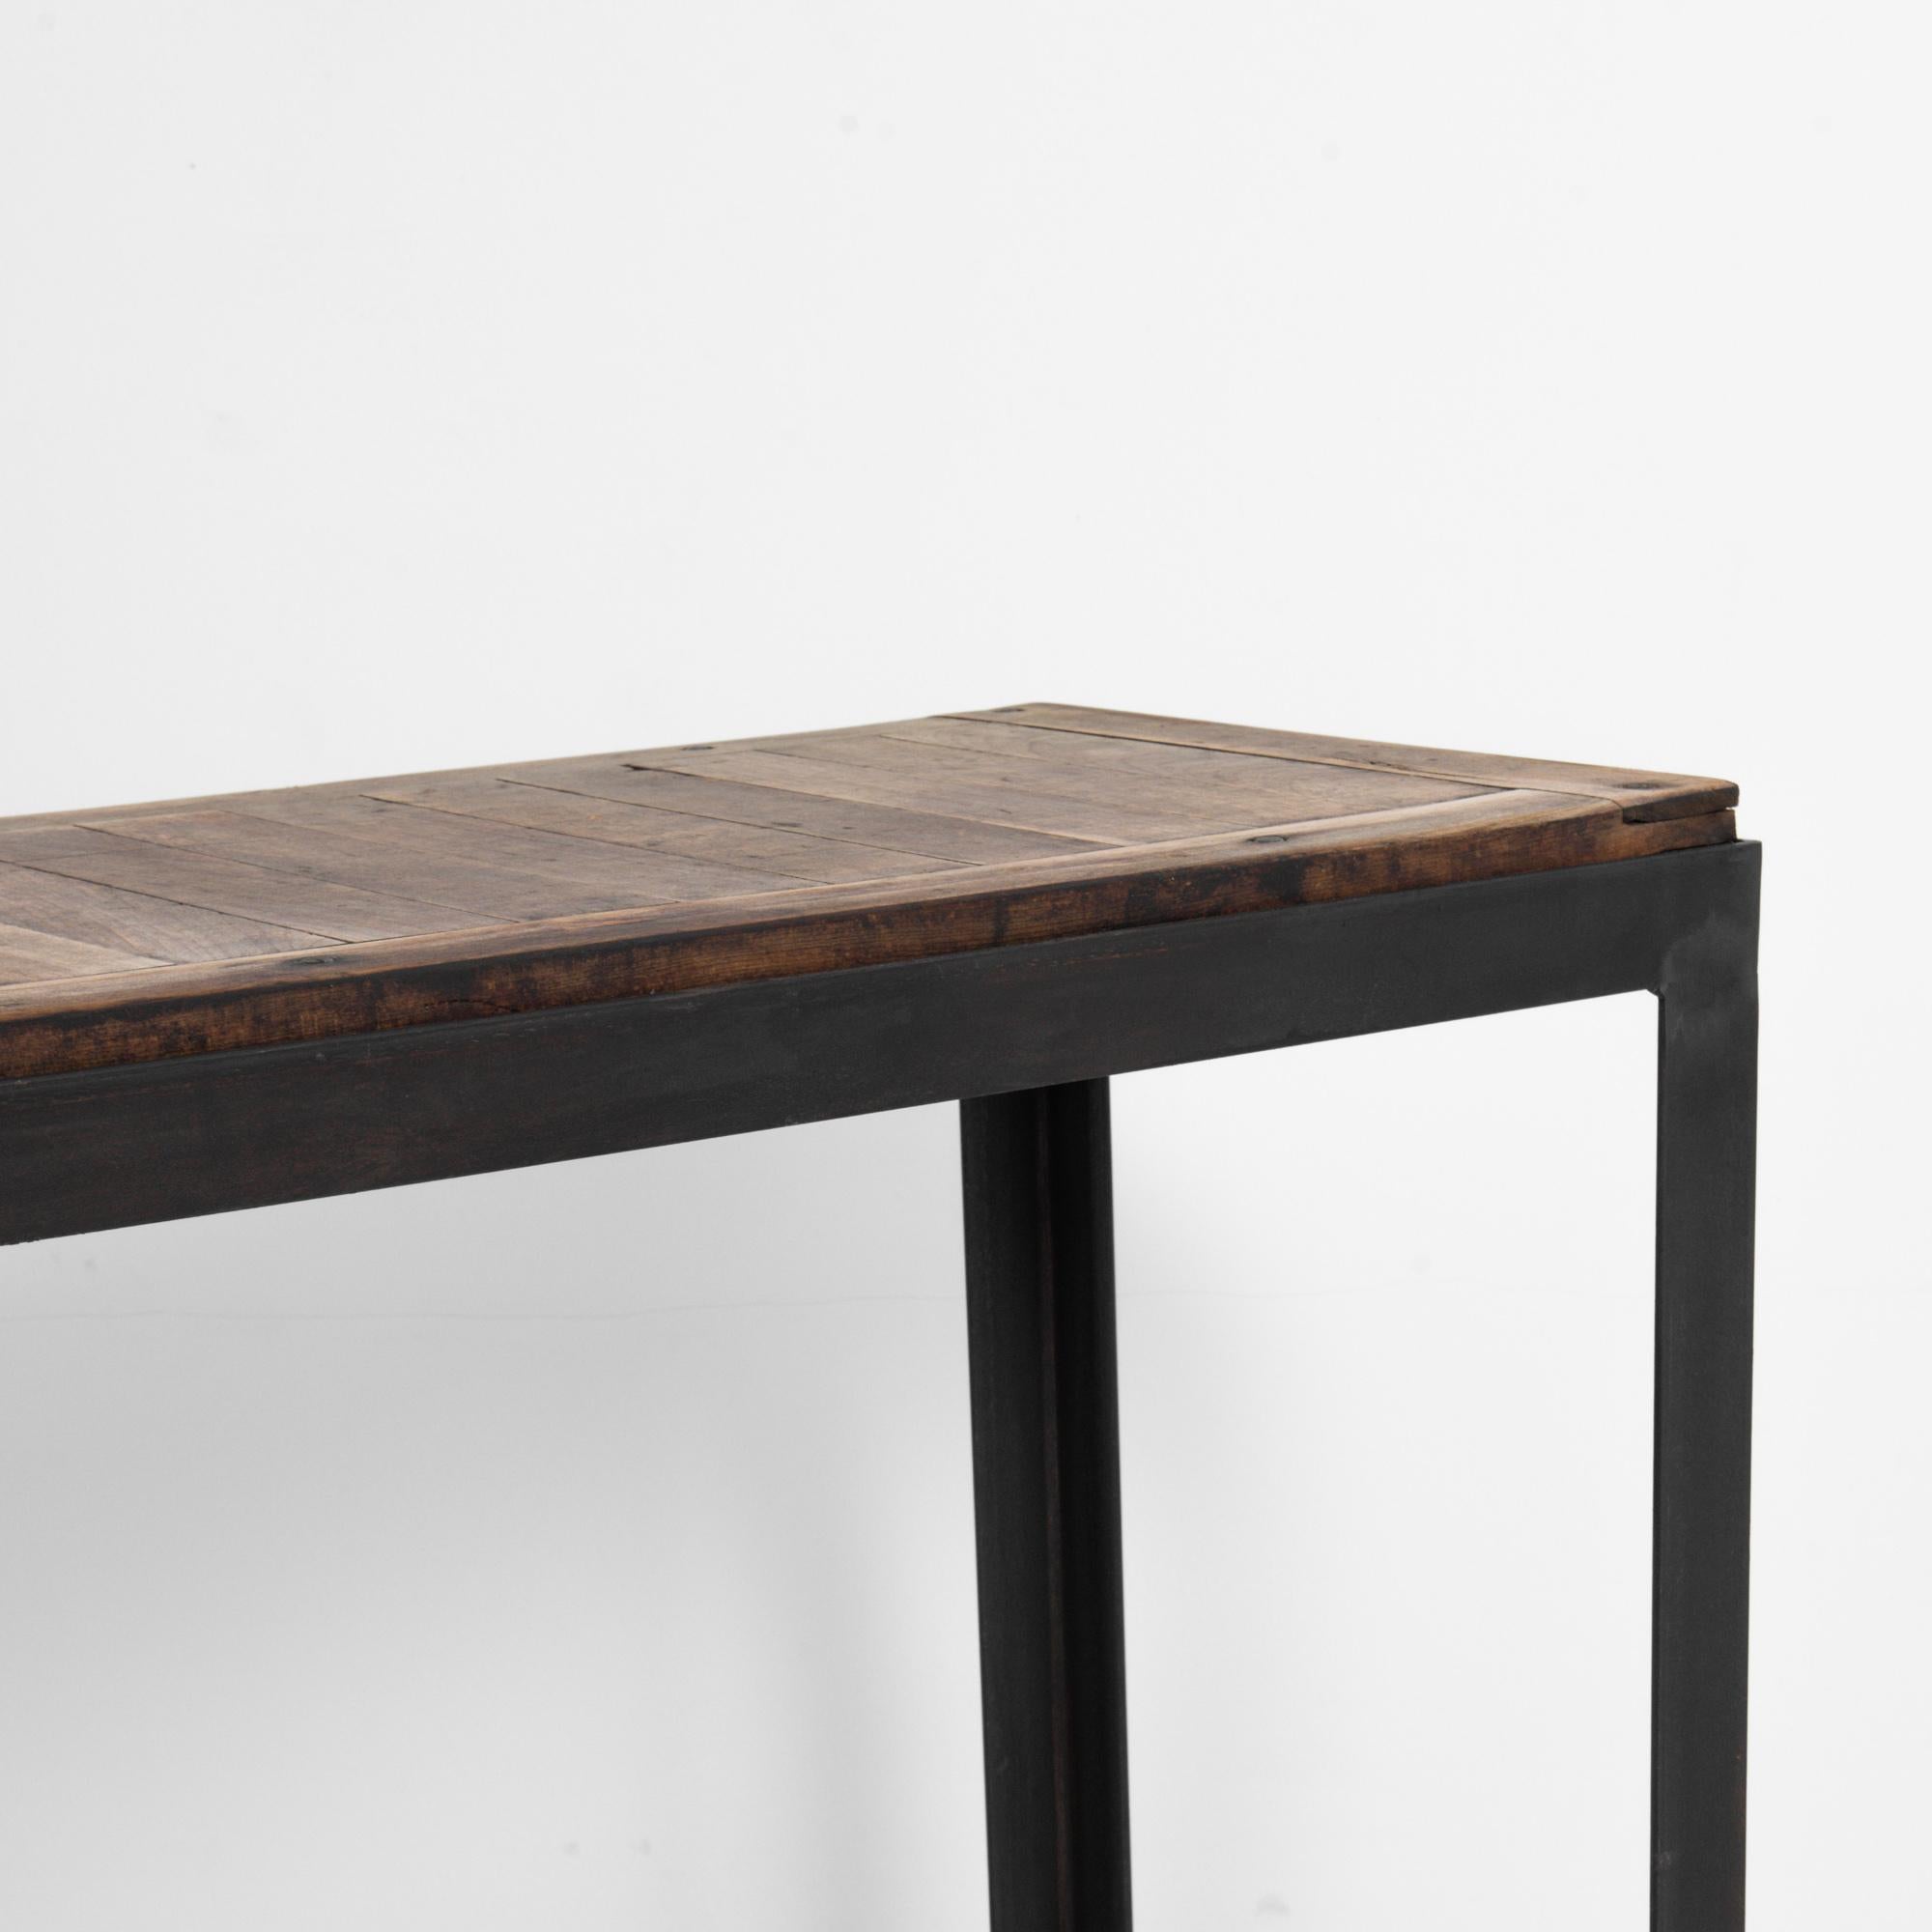 Steel 20th Century European Minimalist Table with Wooden Table Top